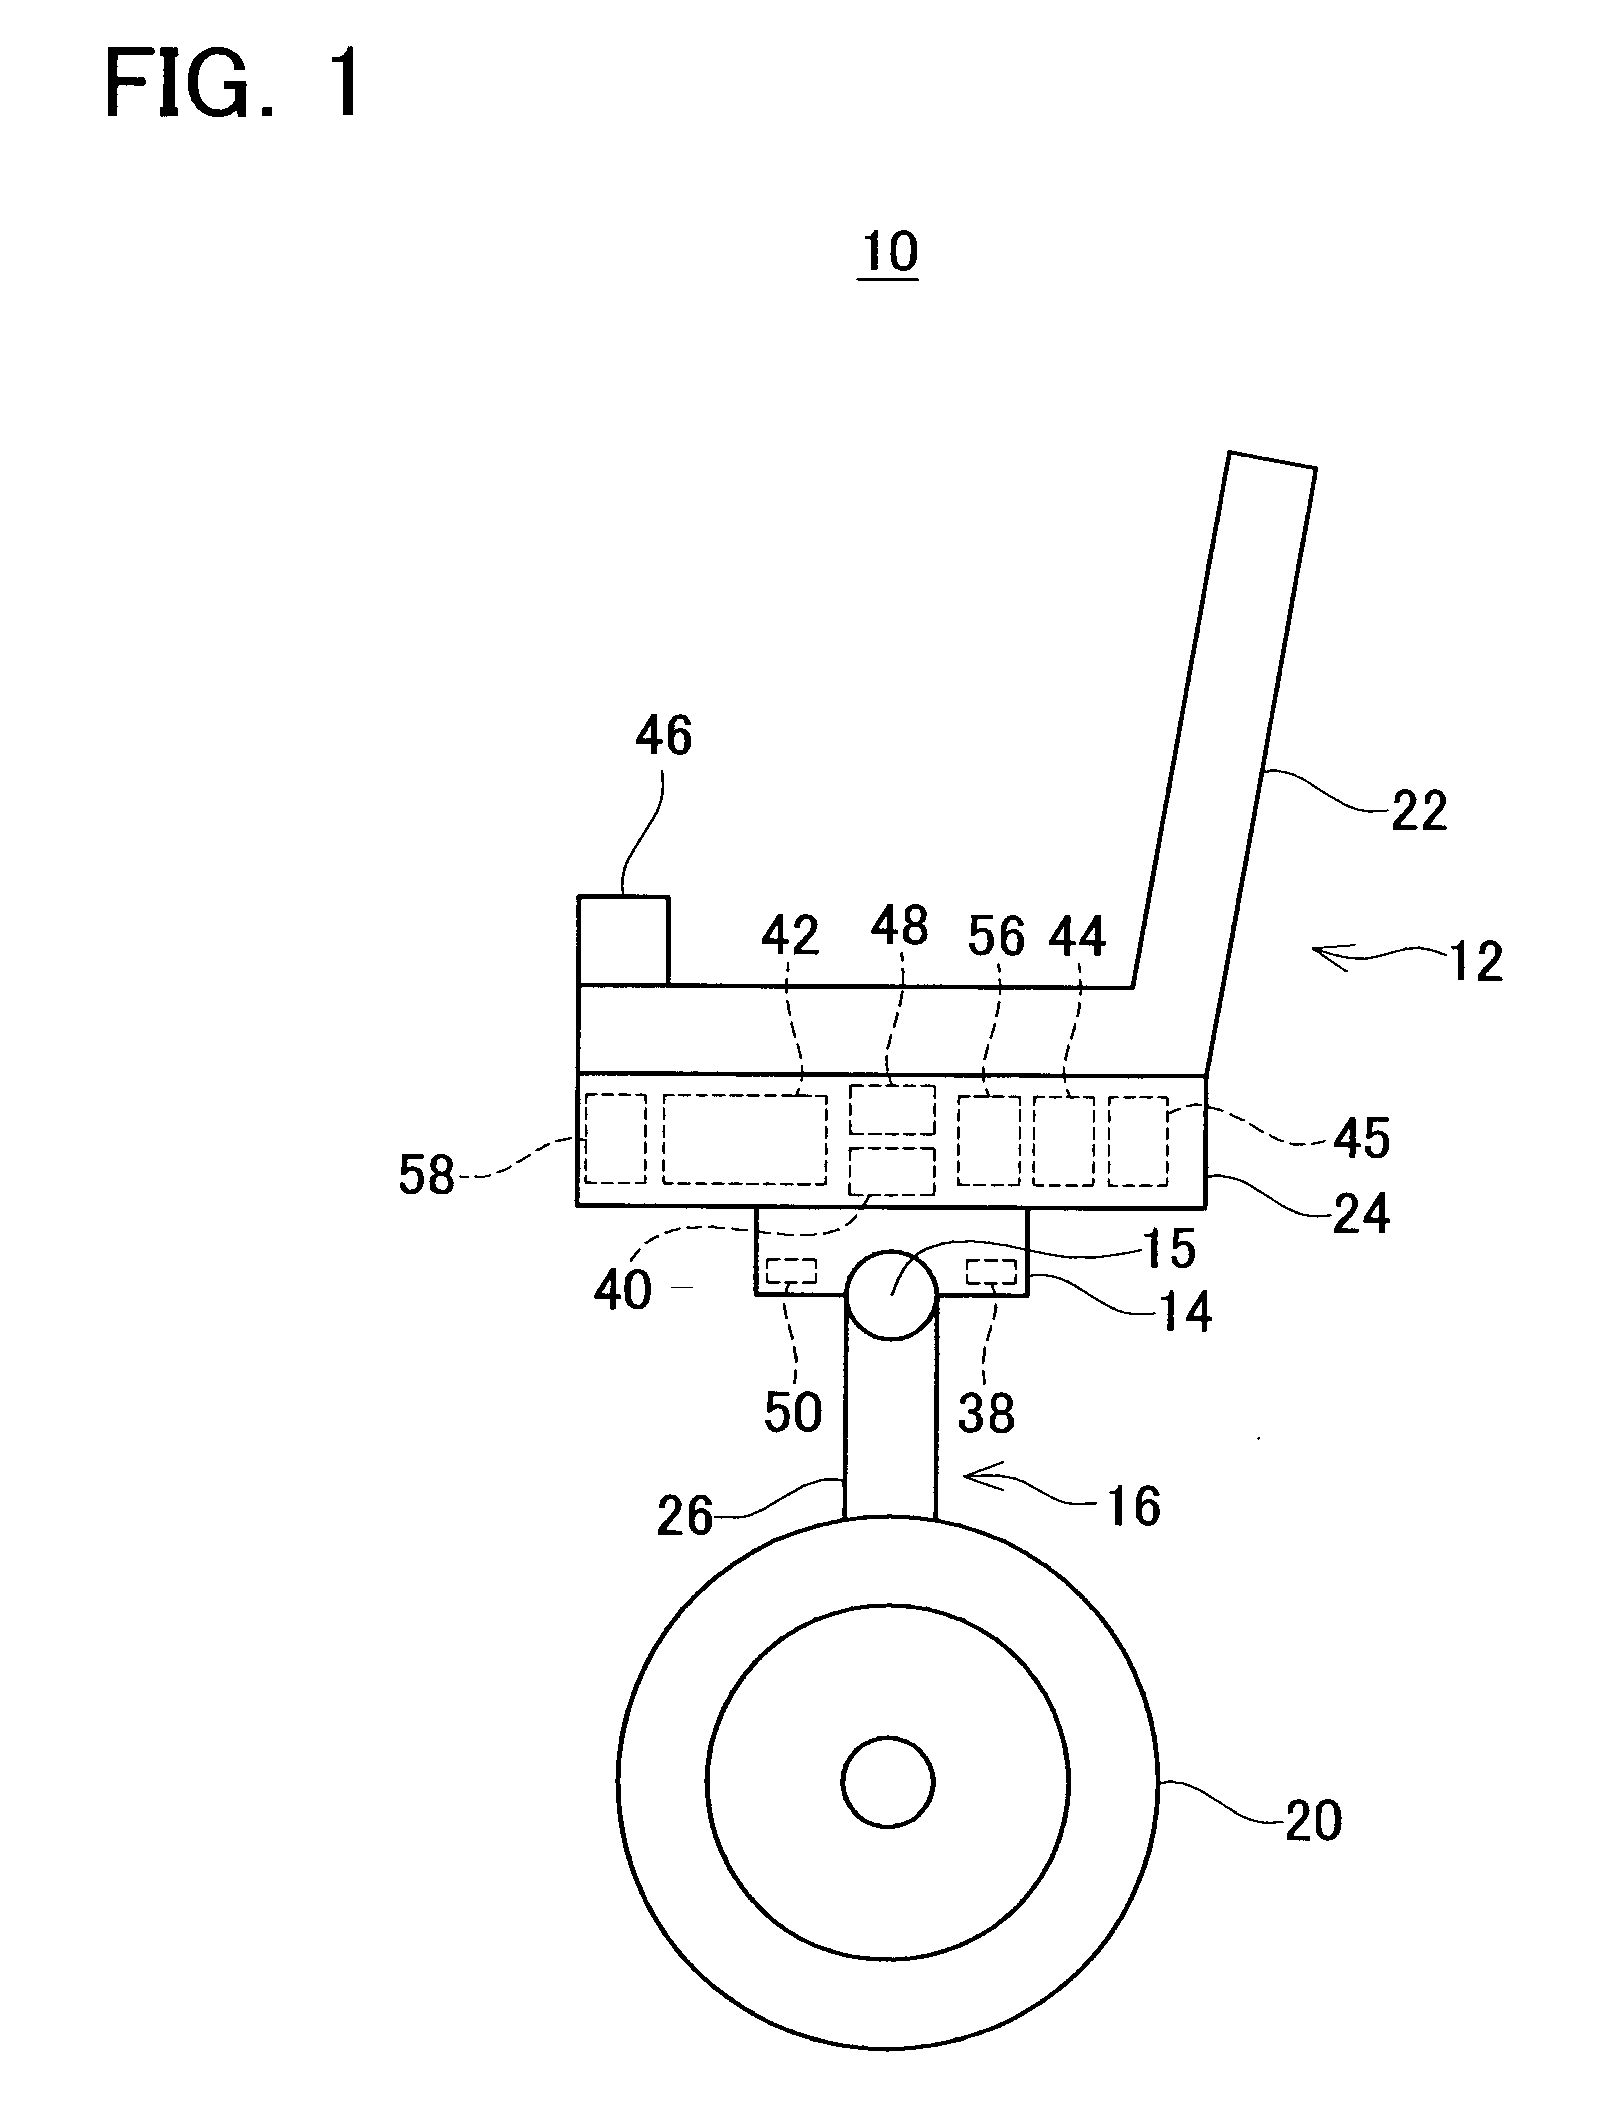 Coaxial two-wheeled inverted pendulum type moving vehicle